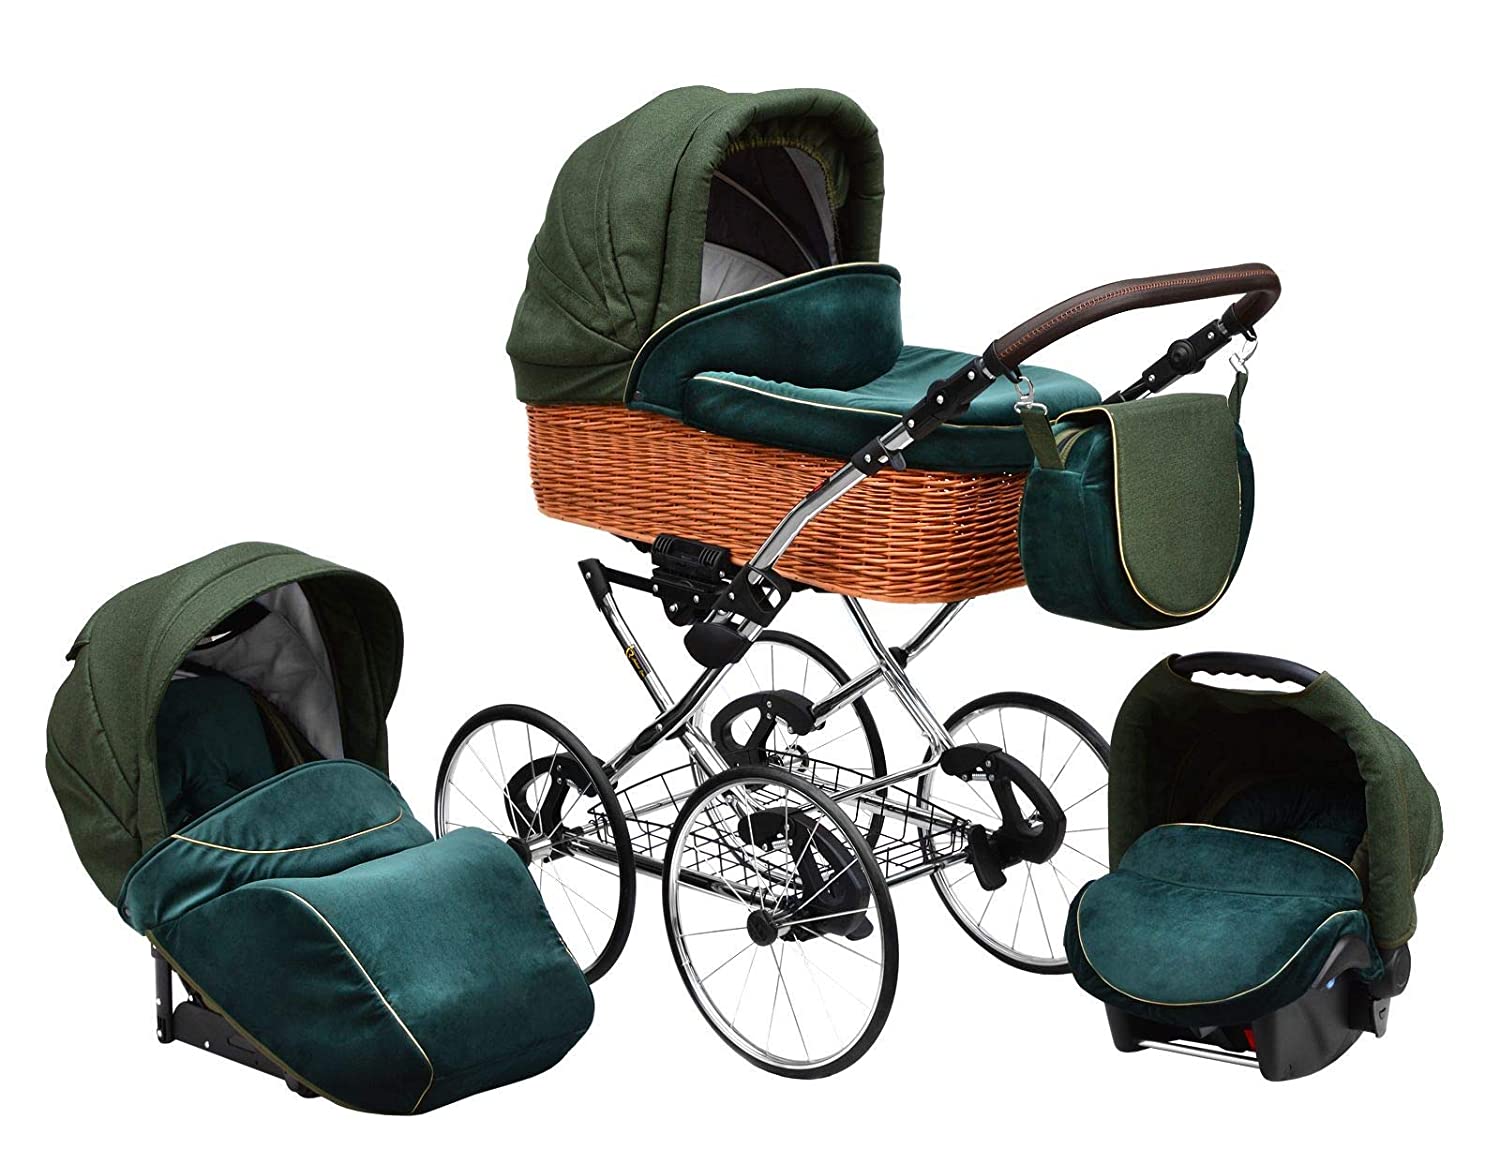 Lux4Kids Retro Pushchair Nature One Pro Puncture-Free 27 Inch Spoke Wheels Wicker Basket Racing Green 02 4-in-1 Car Seat + Isofix